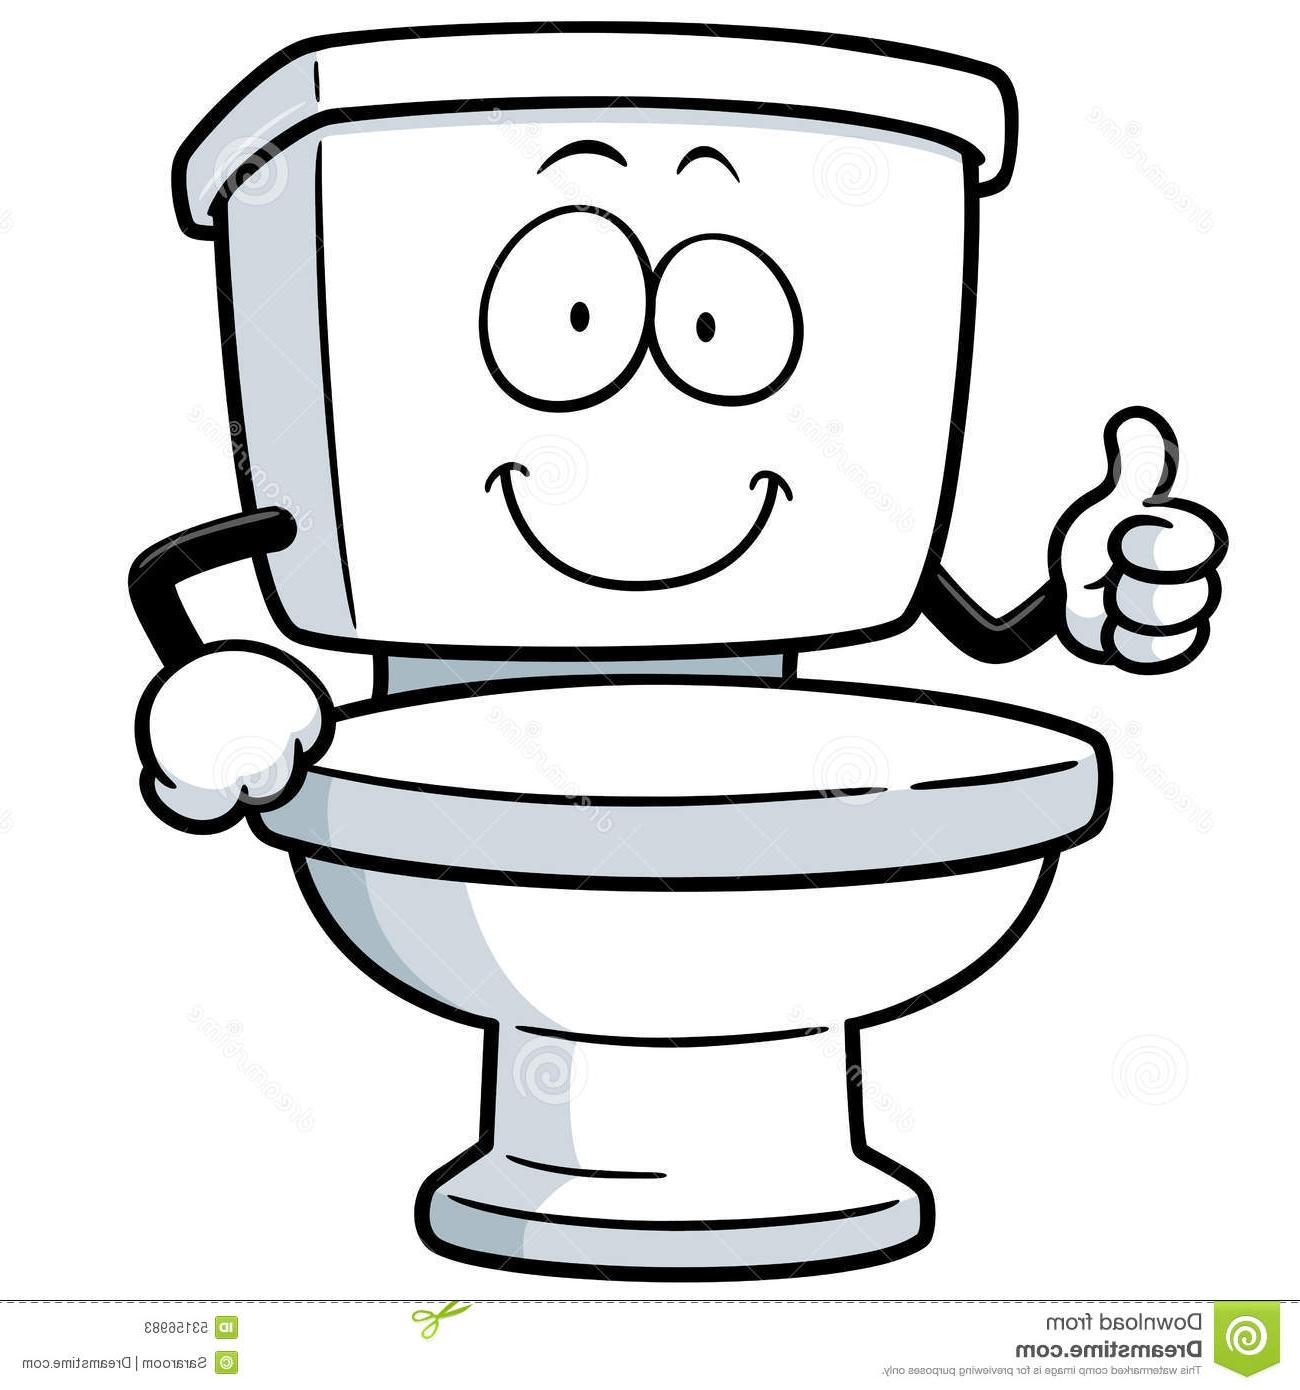 Cliparts Wc Cartoon and other clipart images on Cliparts pub 